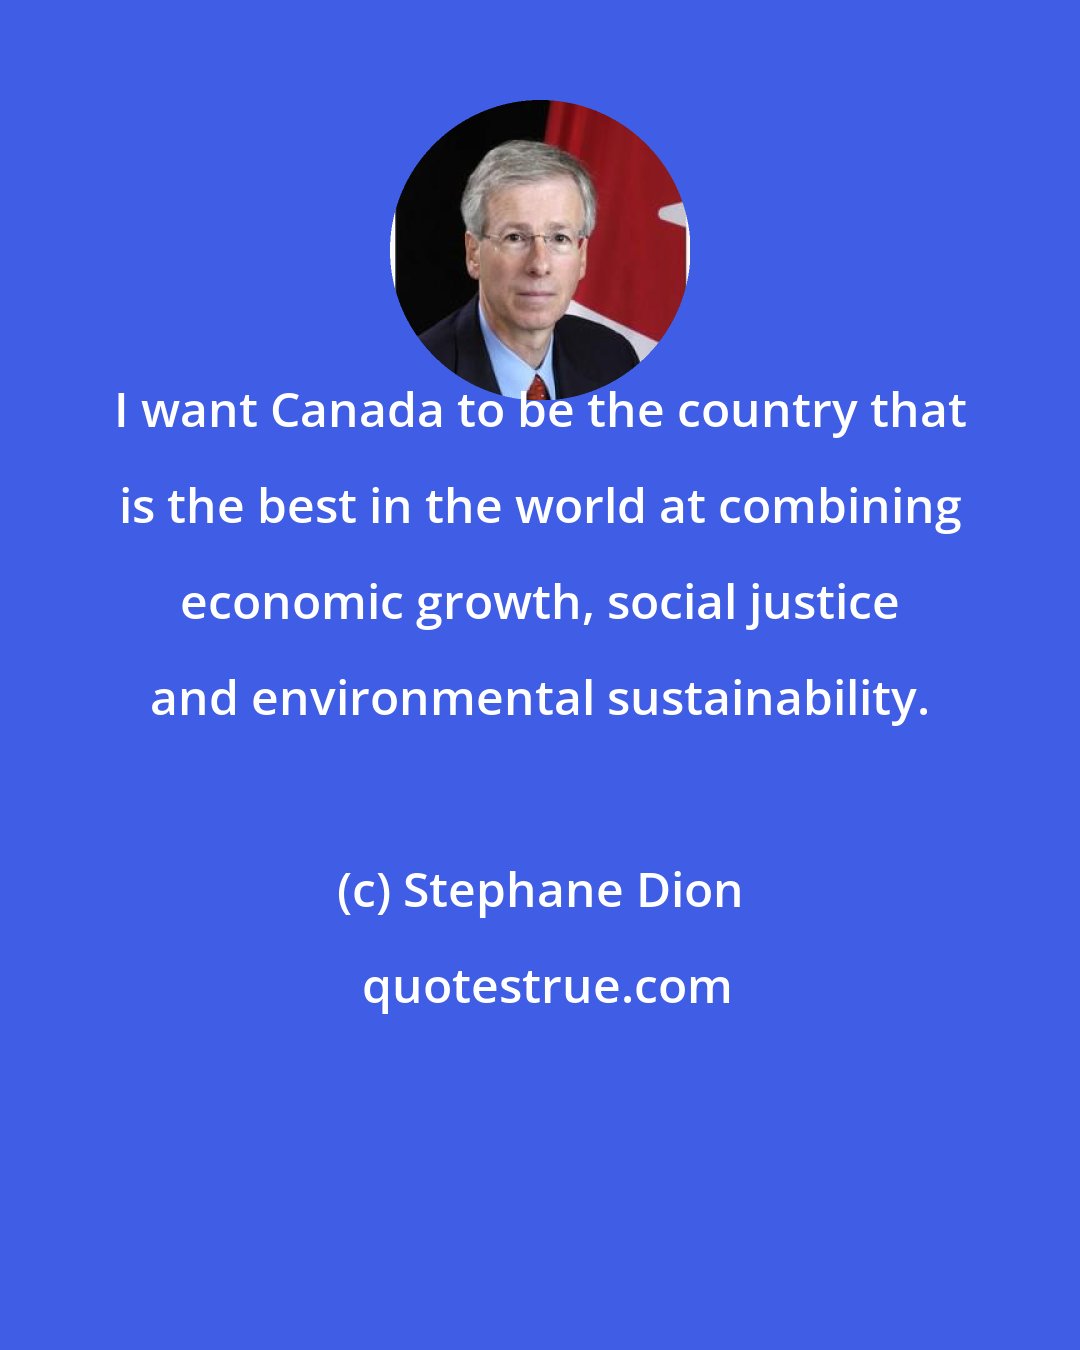 Stephane Dion: I want Canada to be the country that is the best in the world at combining economic growth, social justice and environmental sustainability.